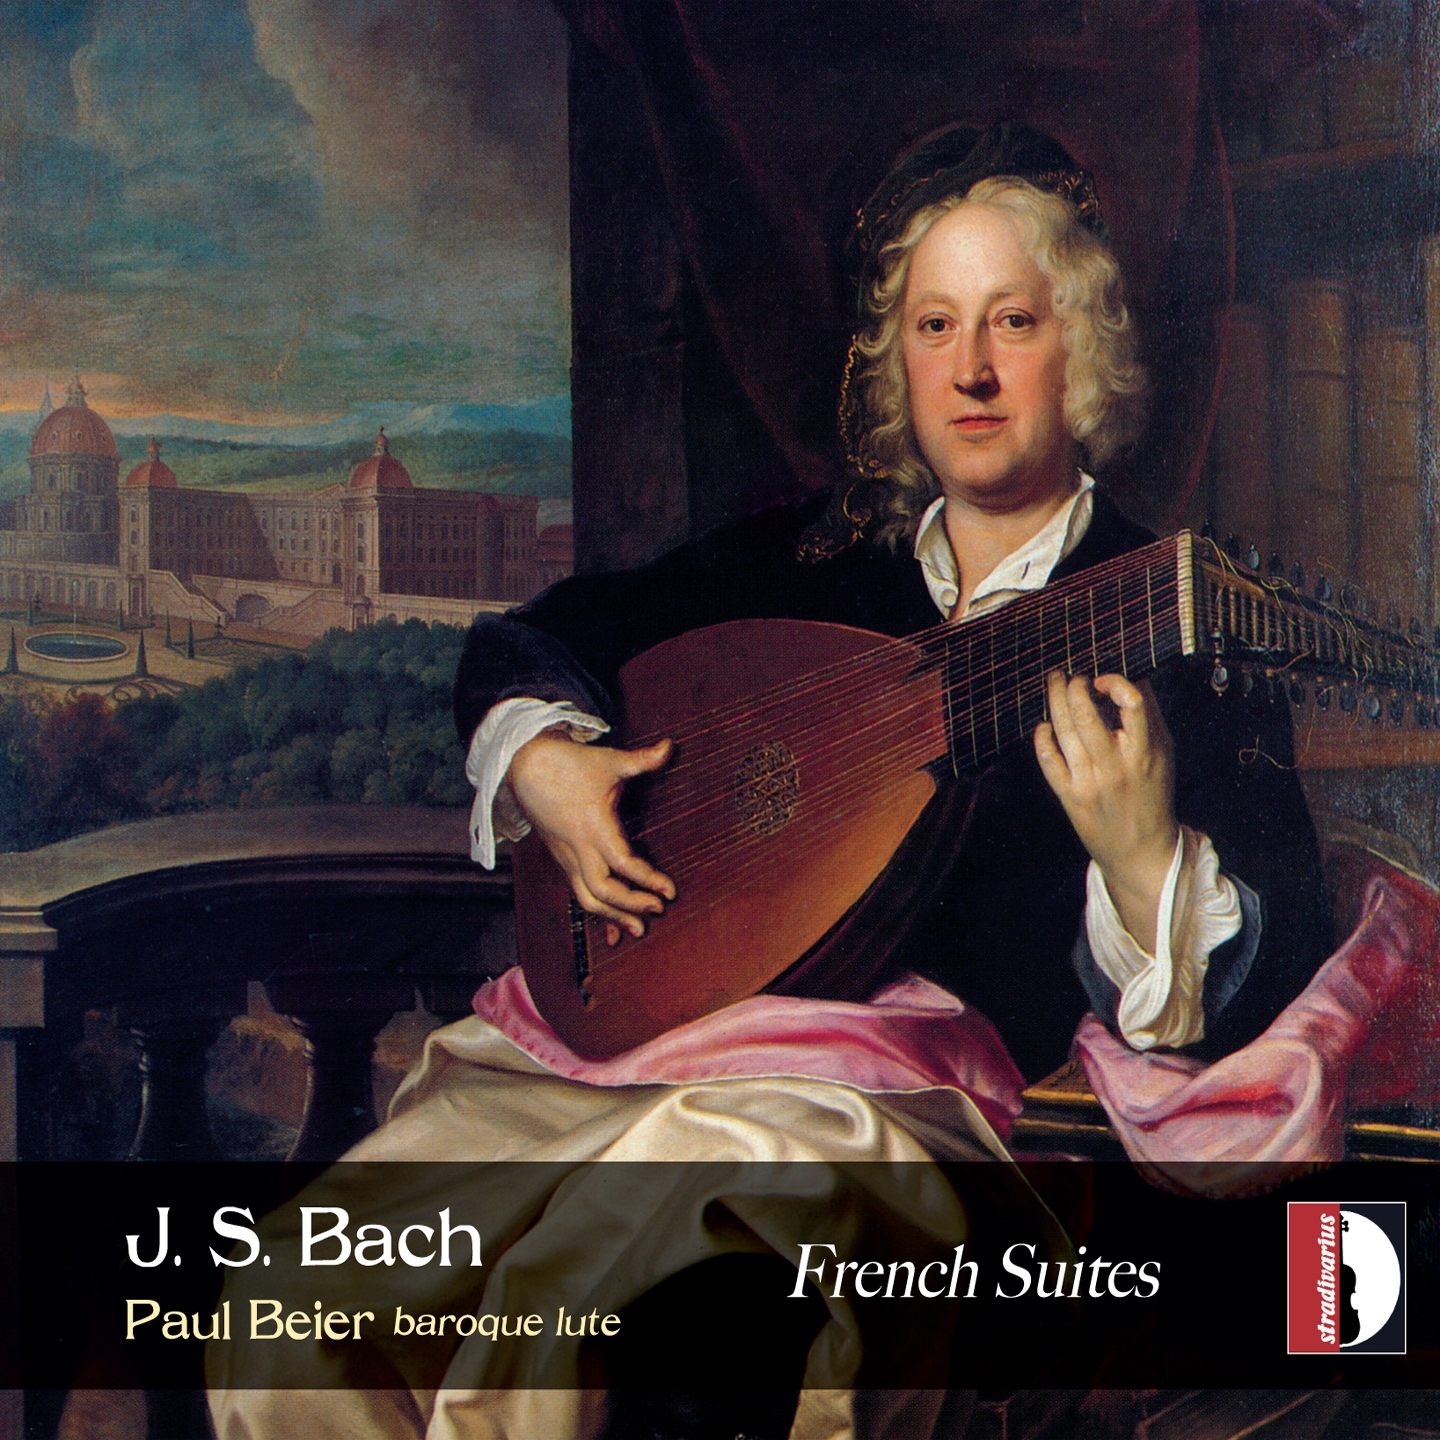 6 French Suites, No. 2 in C Minor, BWV 813: V. Menuet (Transcription for Lute)